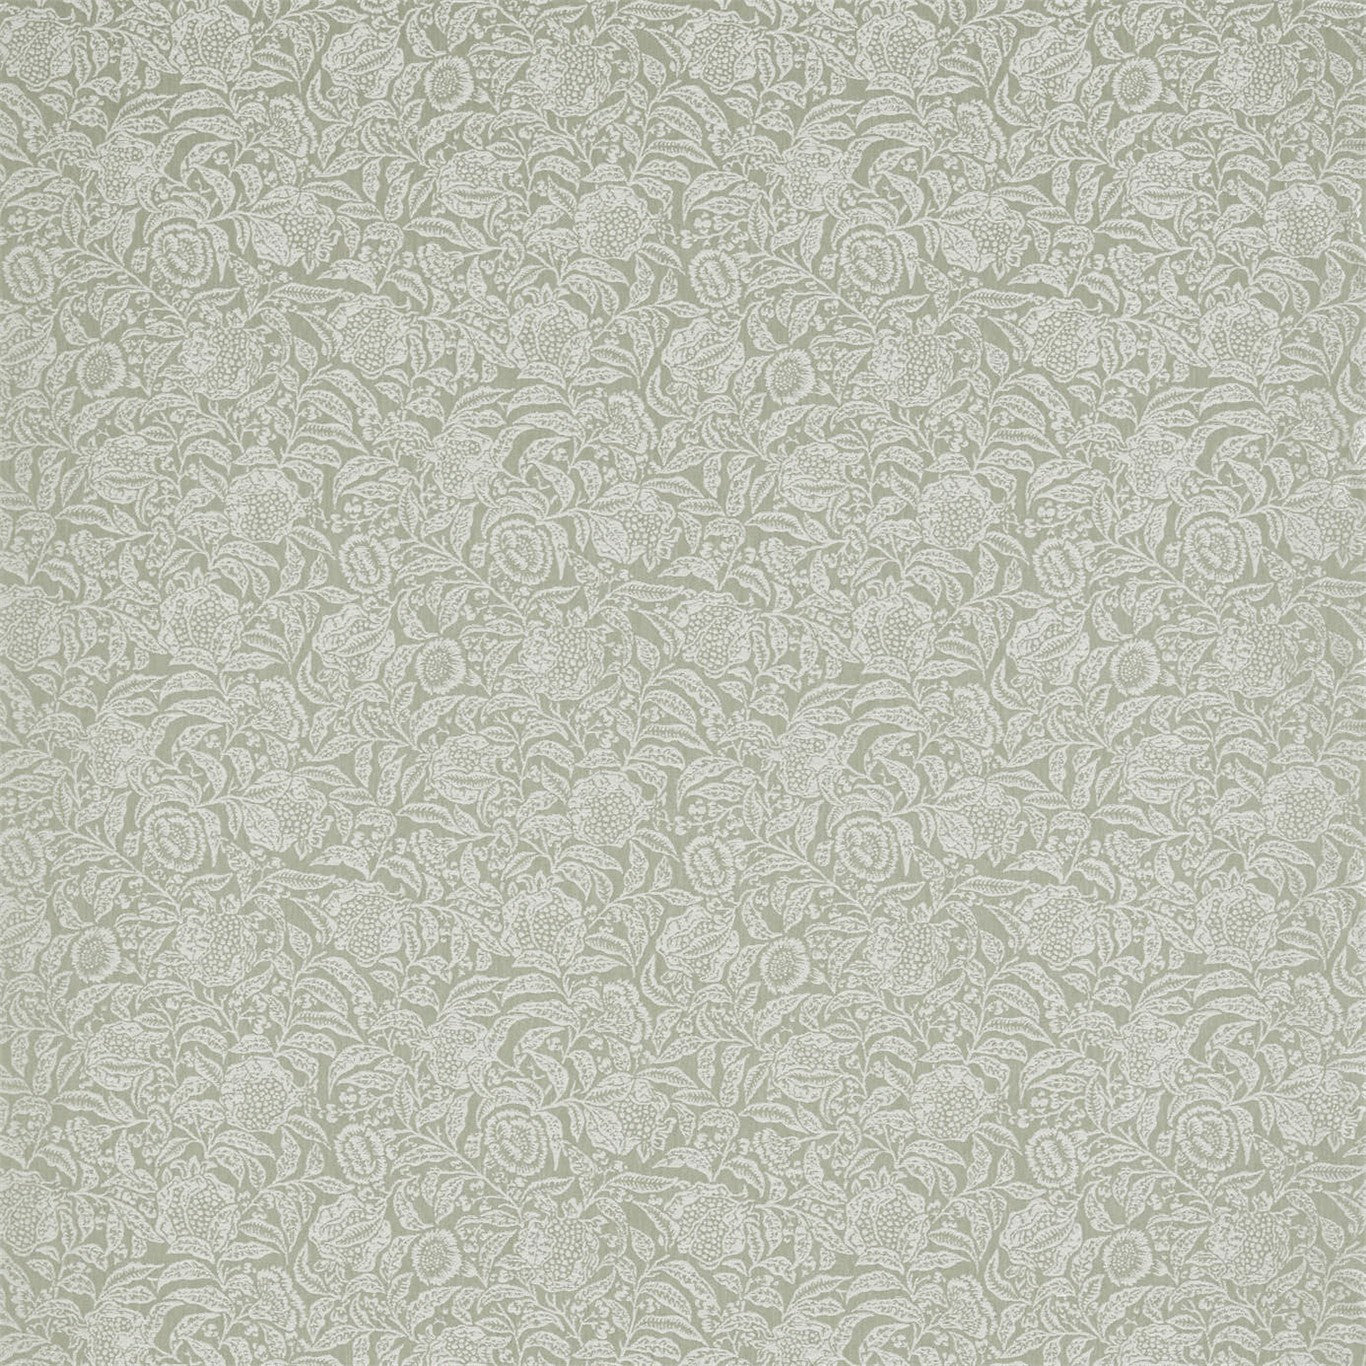 Annandale Weave Fabric by Sanderson - DDAM236466 - Willow